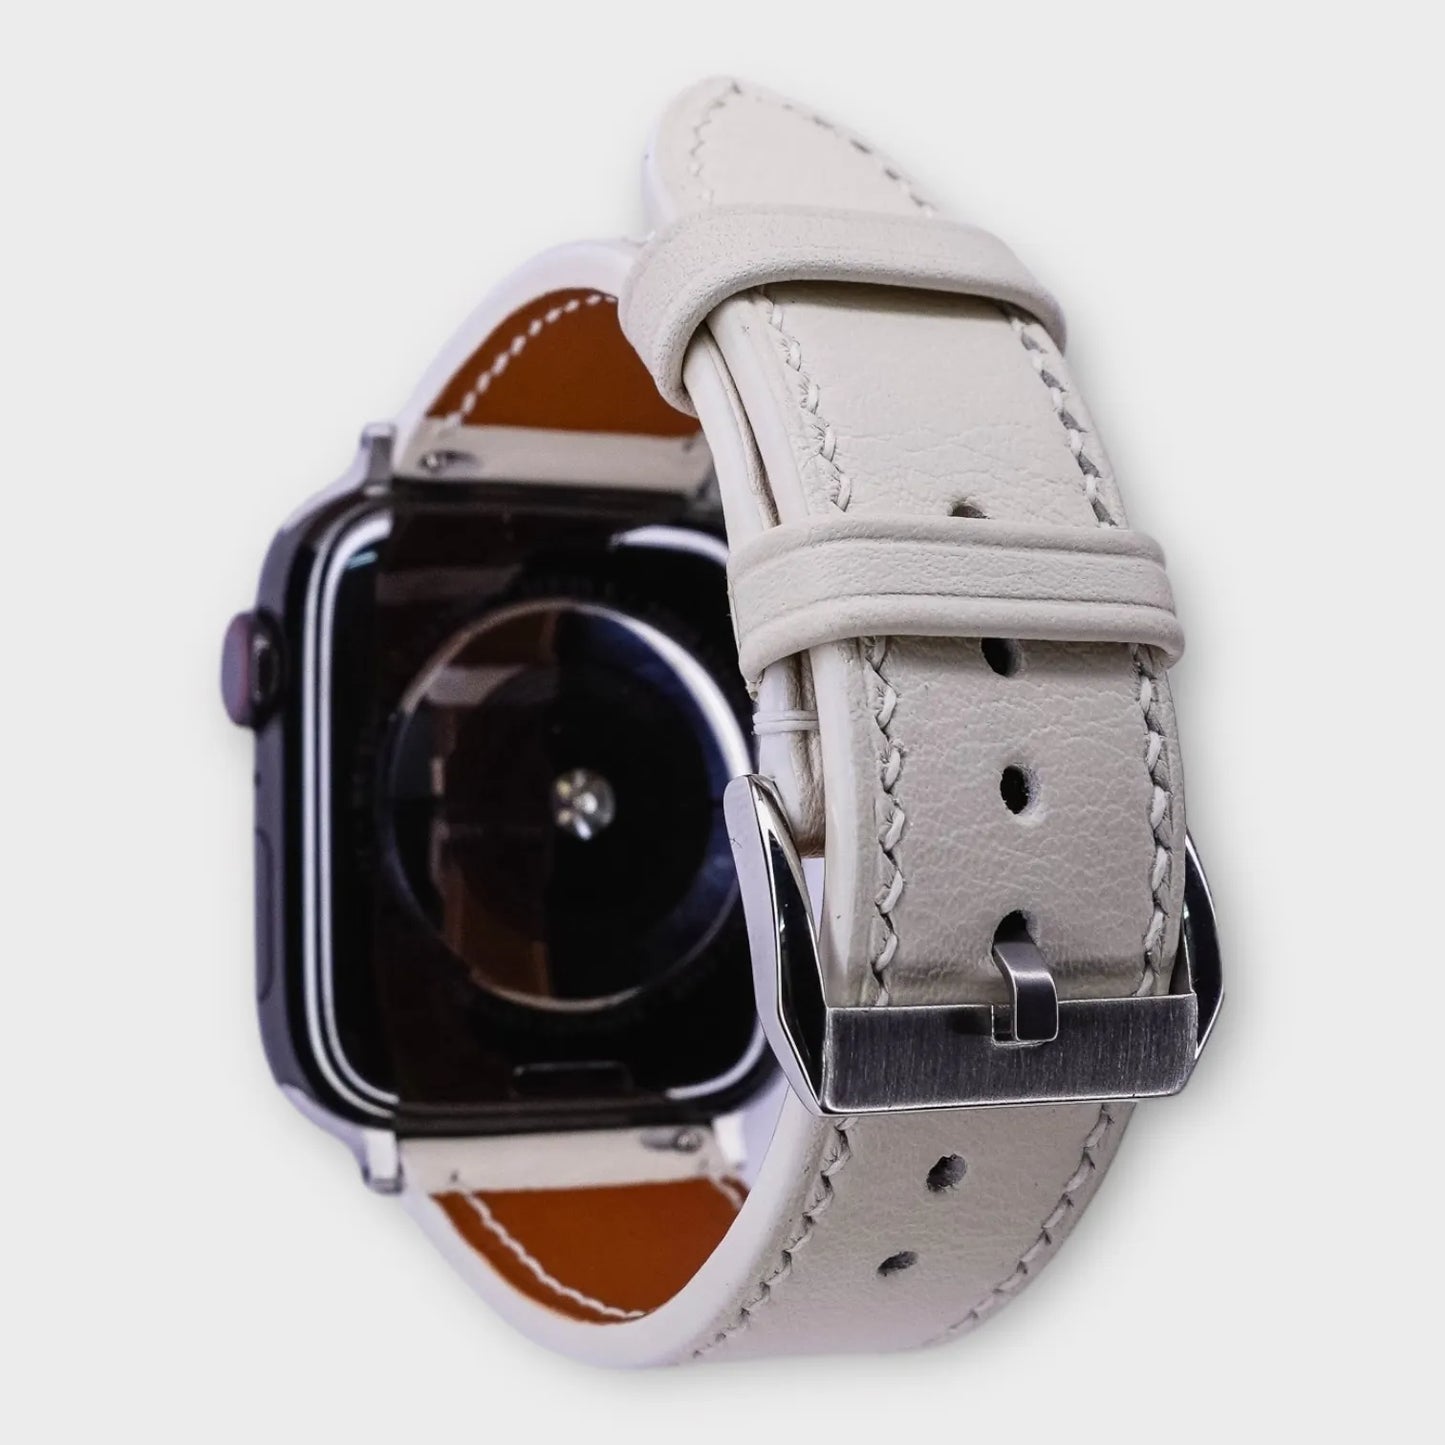 Chic apple watch leather band in white French Swift leather, epitome of elegance.